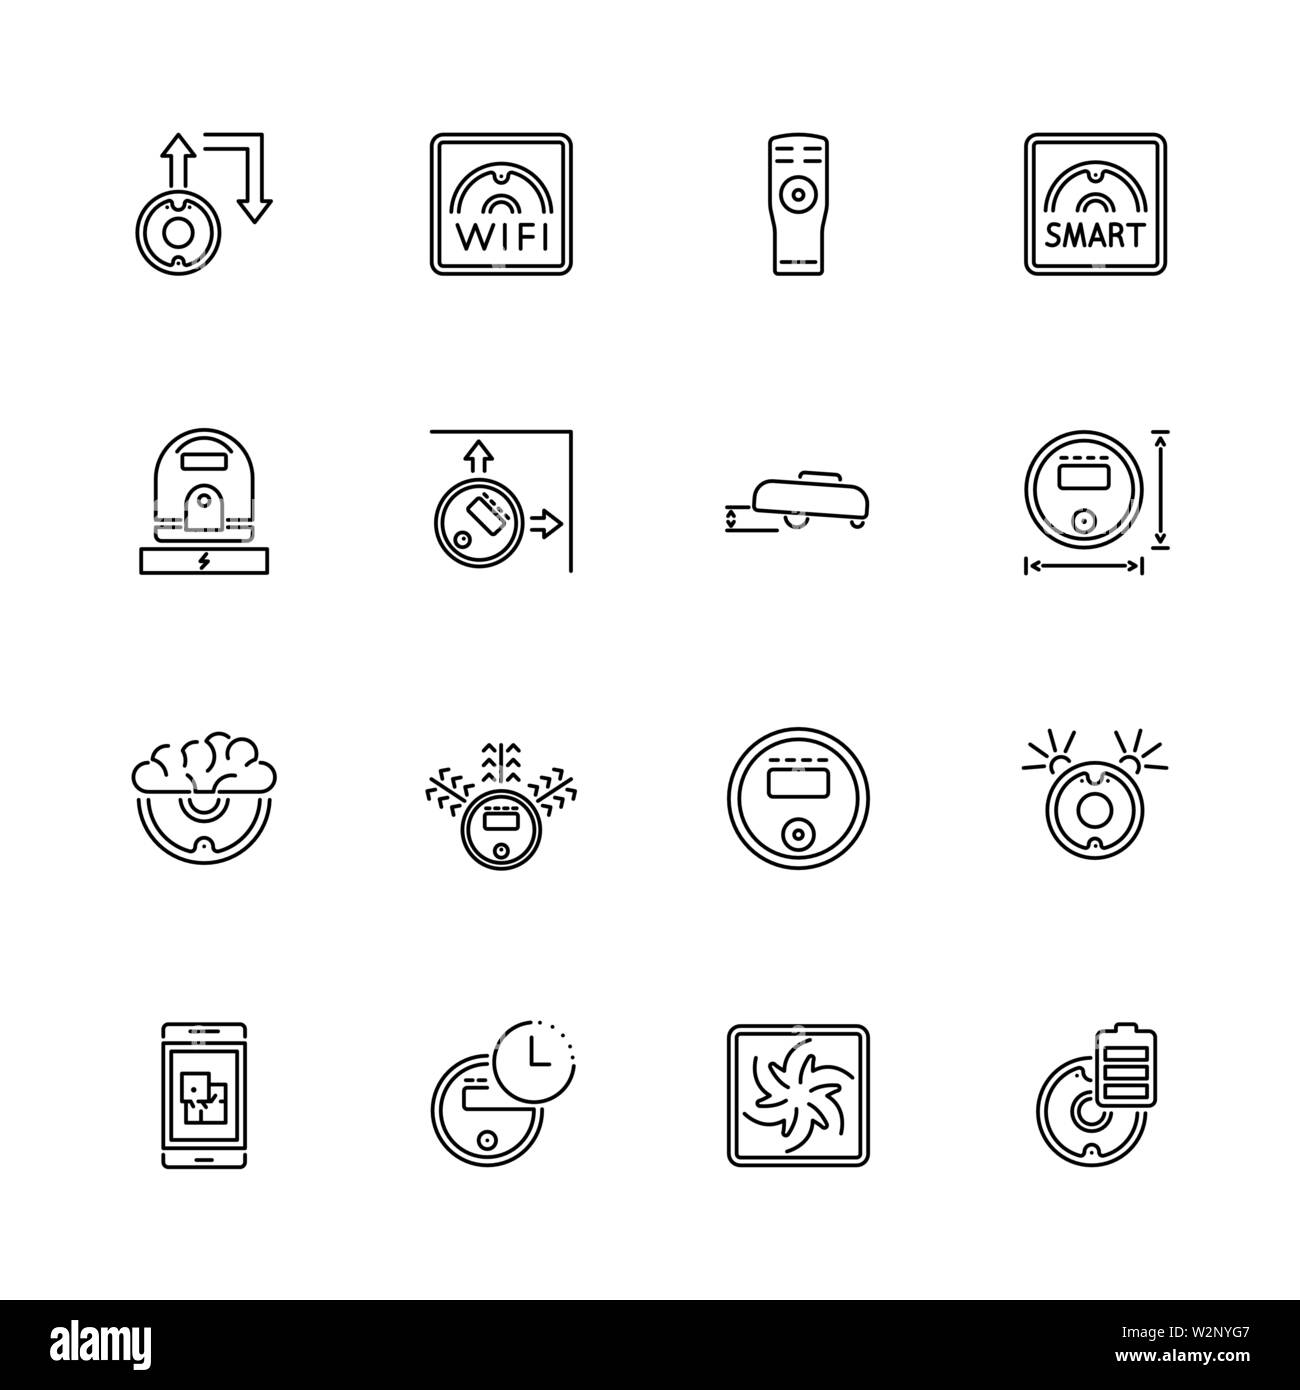 Robot Vacuum Cleaners icons set - Black symbol on white background. Robot Vacuum Cleaners Simple Illustration Symbol - lined Sign Stock Vector & Art - Alamy